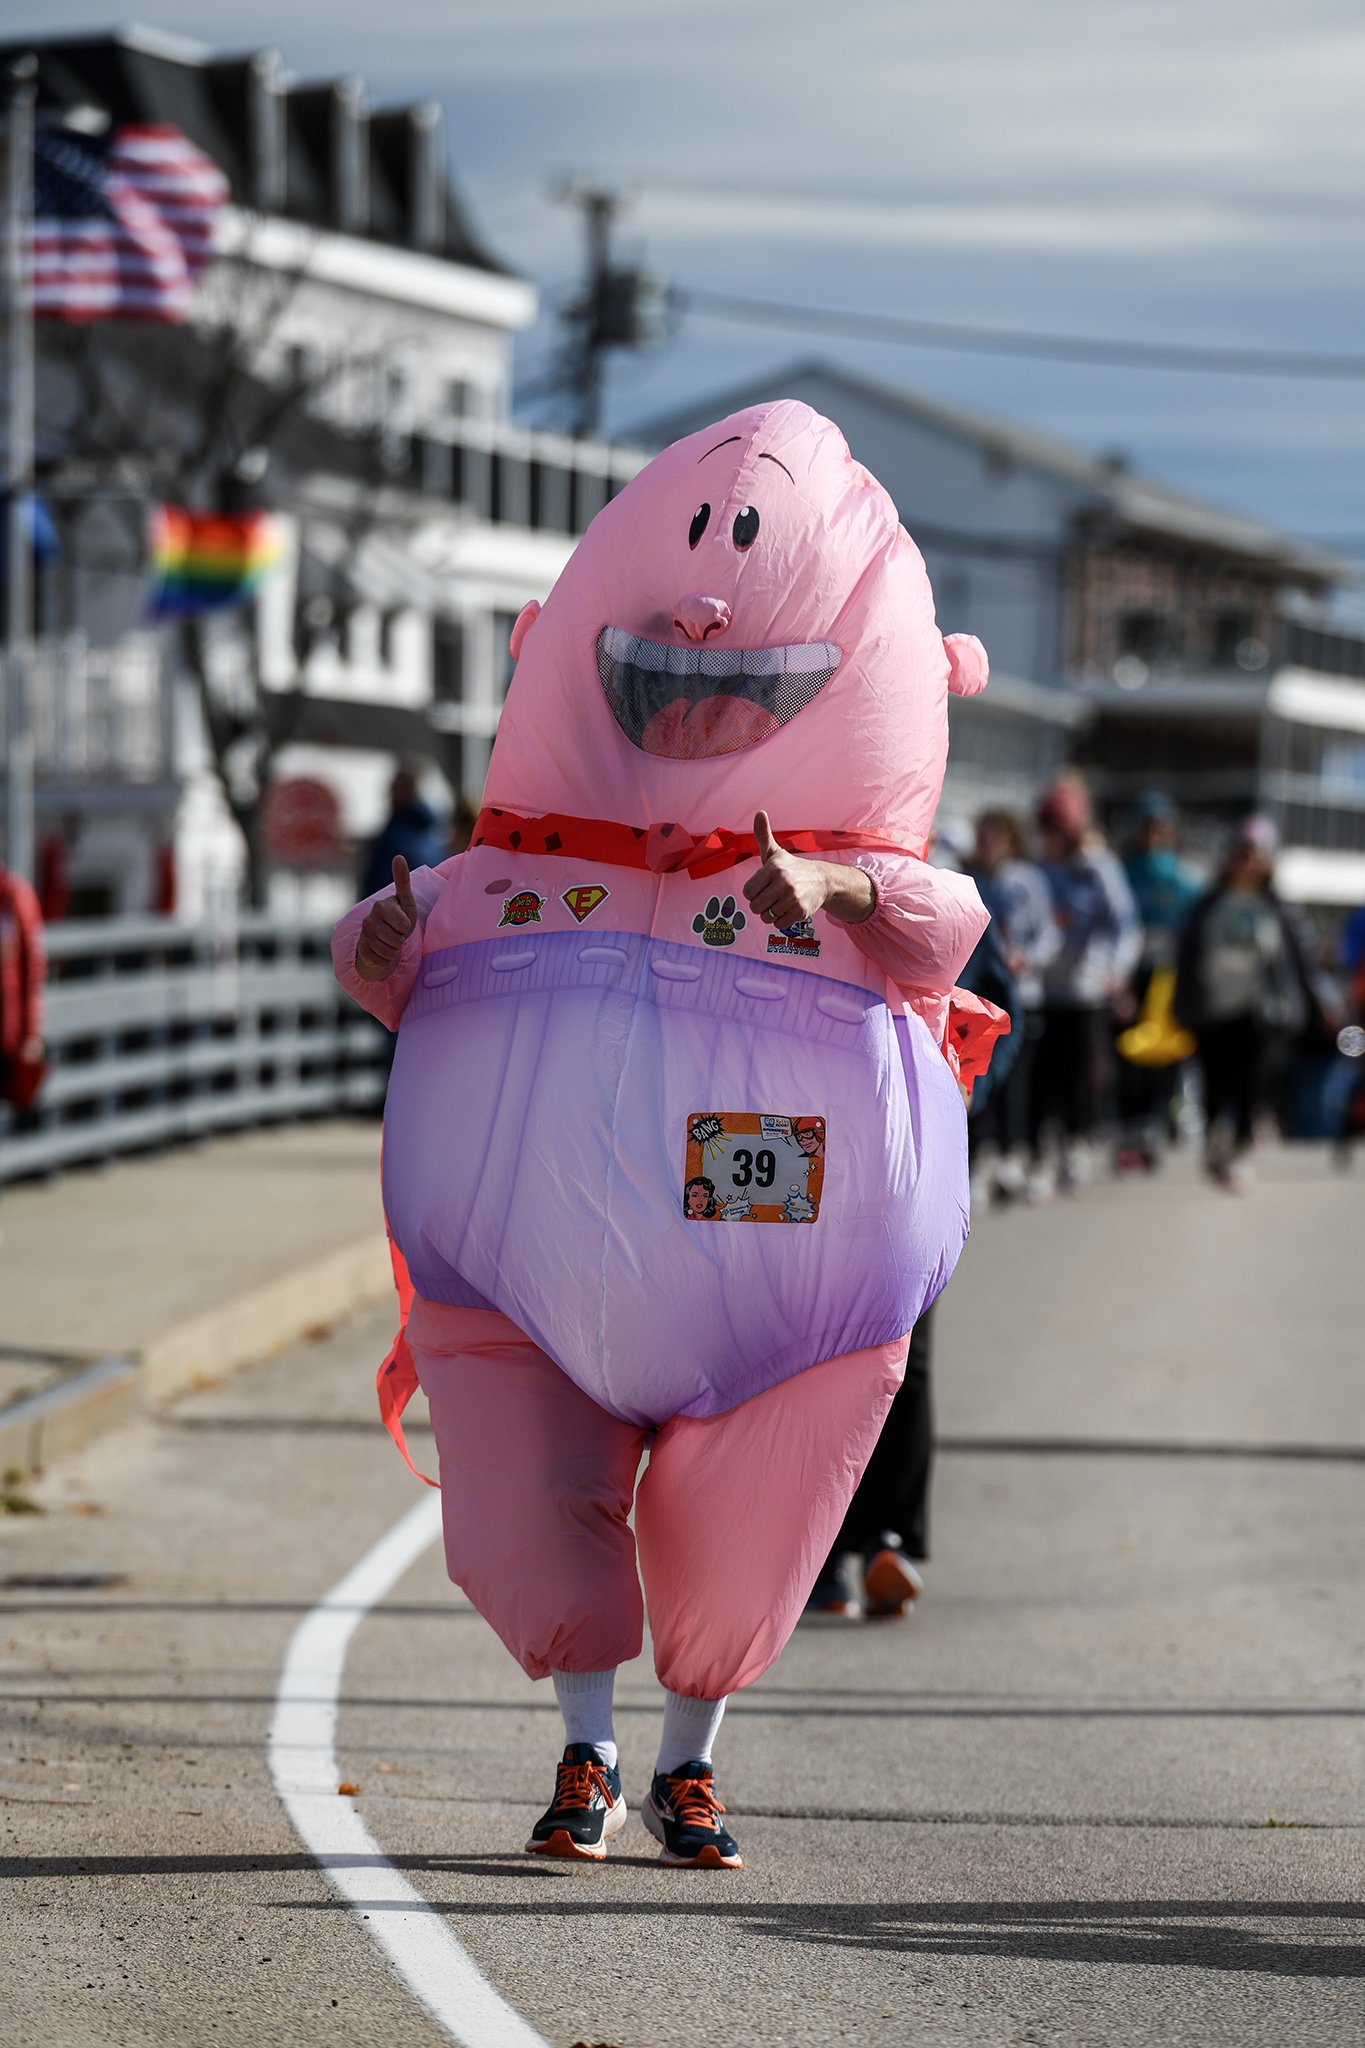 Captain Underpants in a 5K